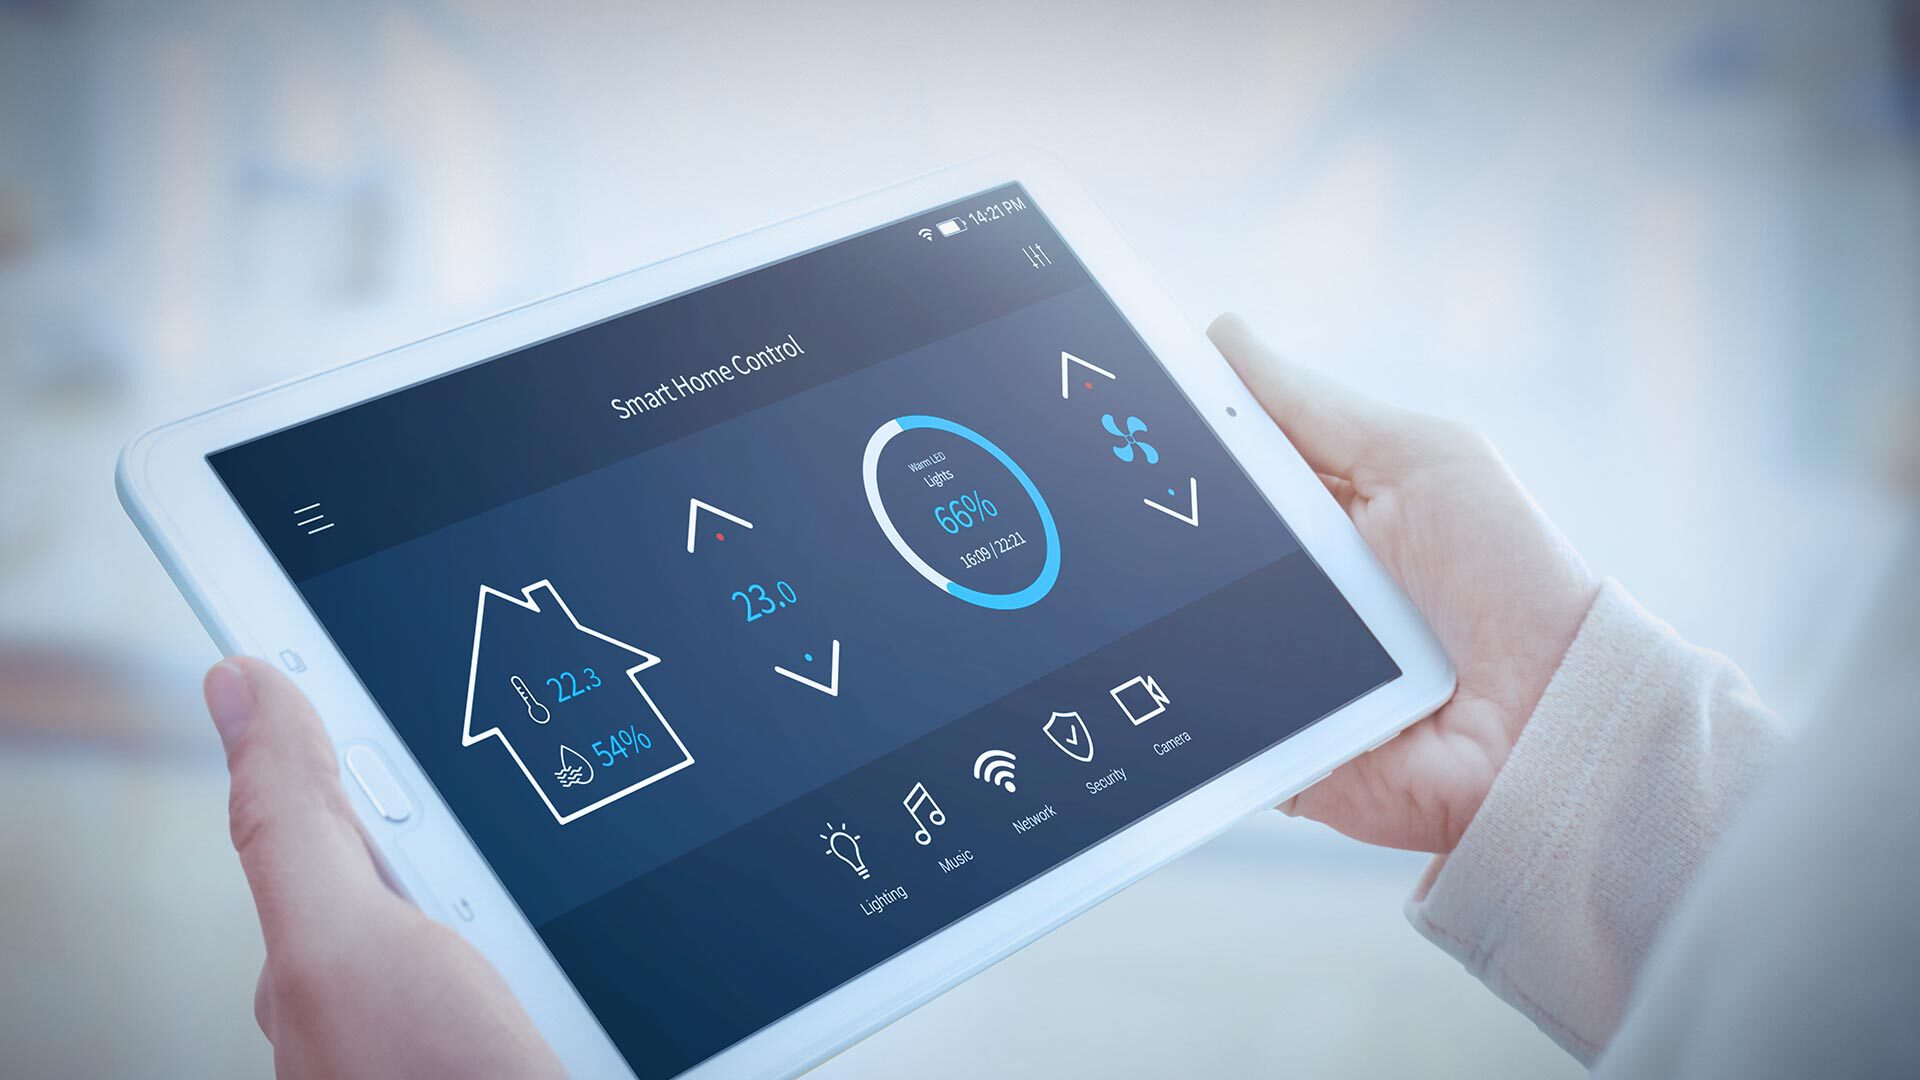 The necessity of IoT Security illustrated by a smart home control on a tablet